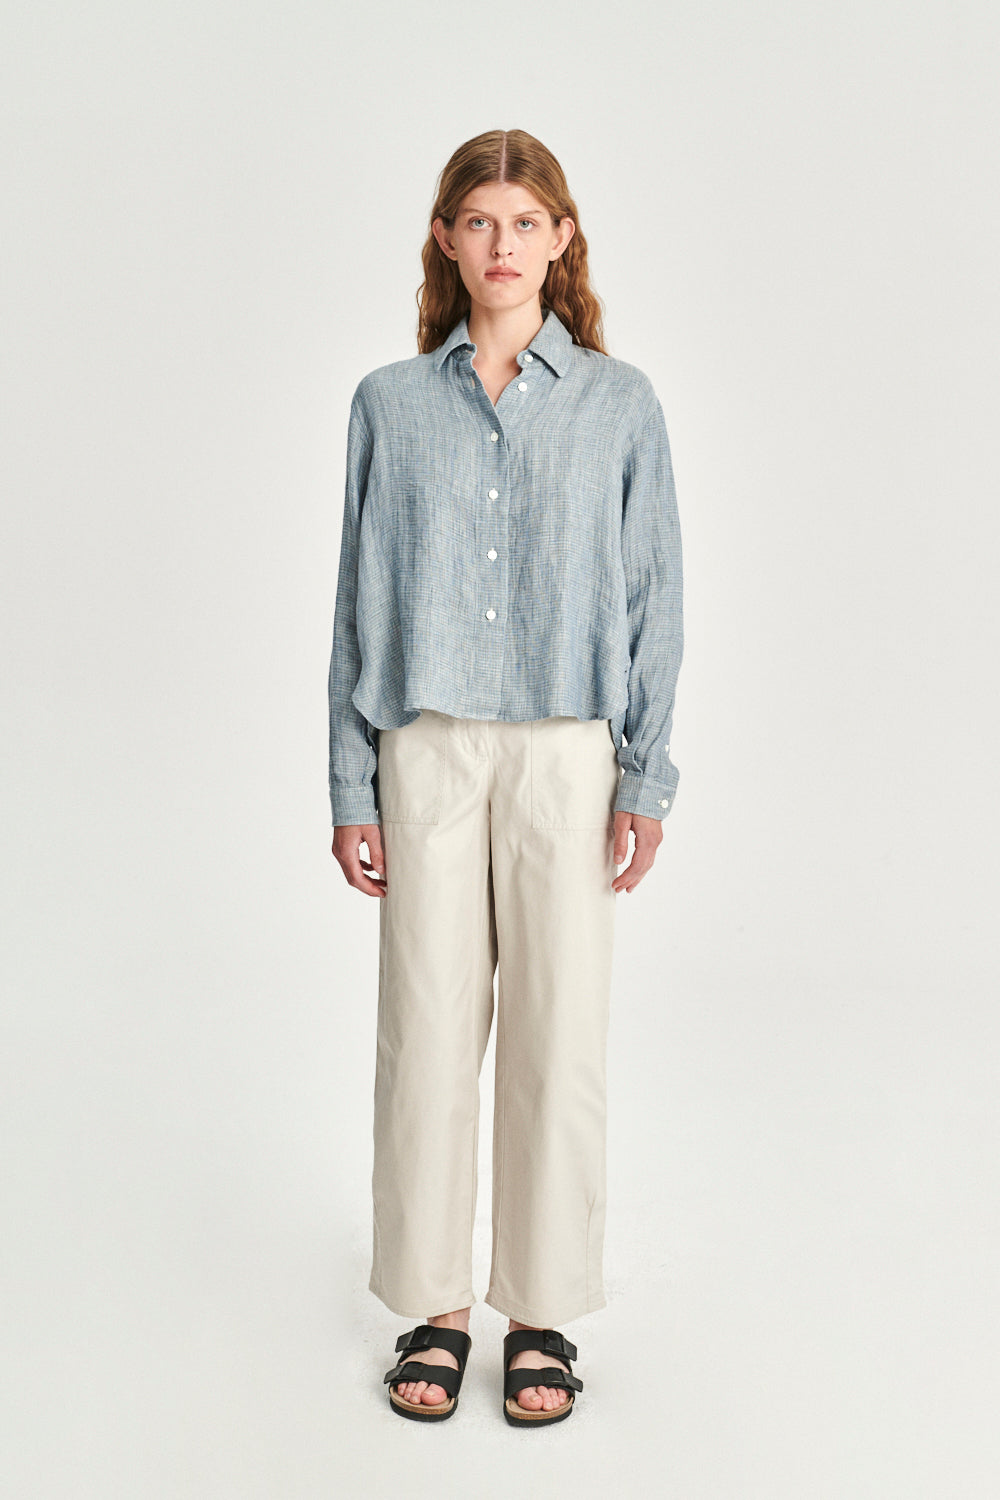 Relaxed Shirt in a Double Sided Blue and Green Fatigue Italian Linen and Cotton